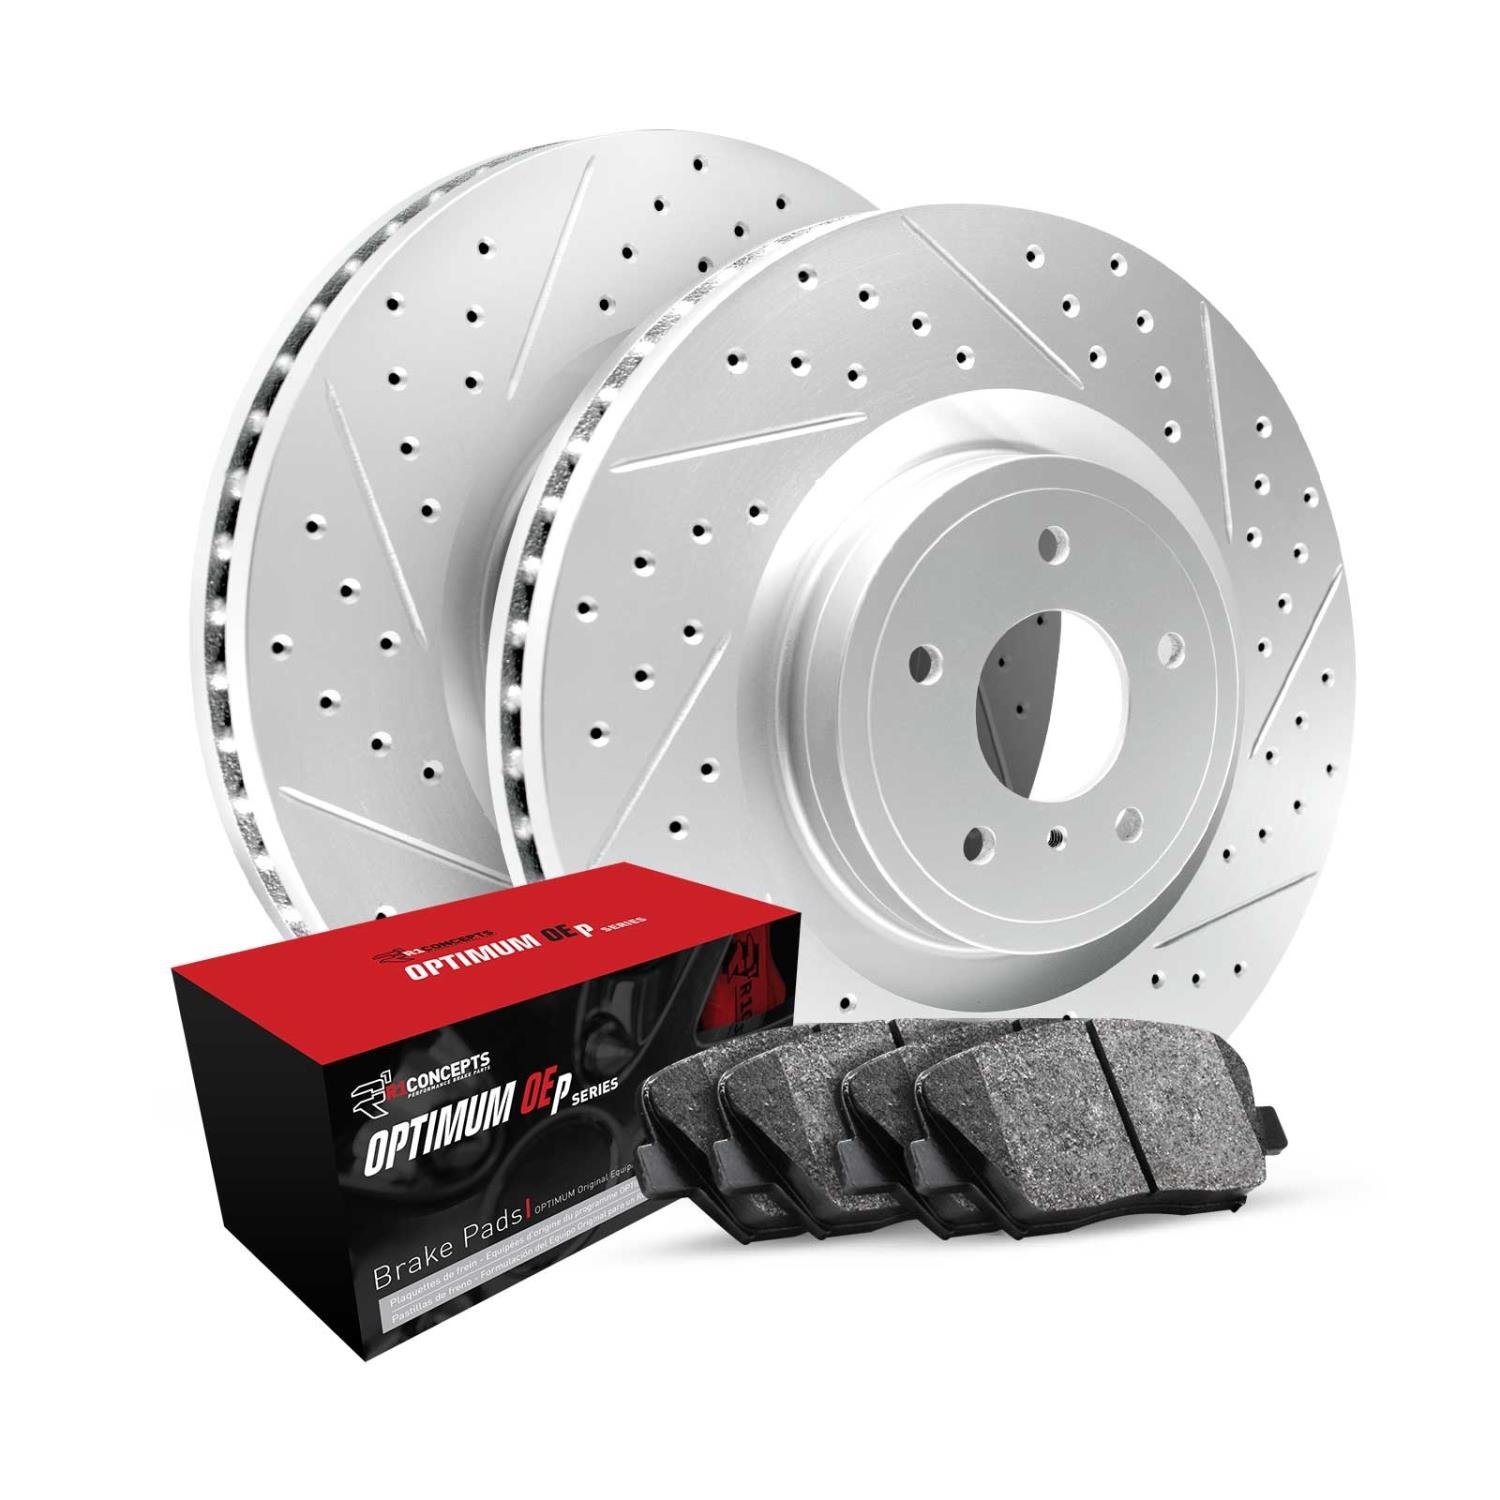 GEO-Carbon Drilled & Slotted Brake Rotor Set w/Optimum OE Pads, 1990-2005 Fits Multiple Makes/Models, Position: Rear